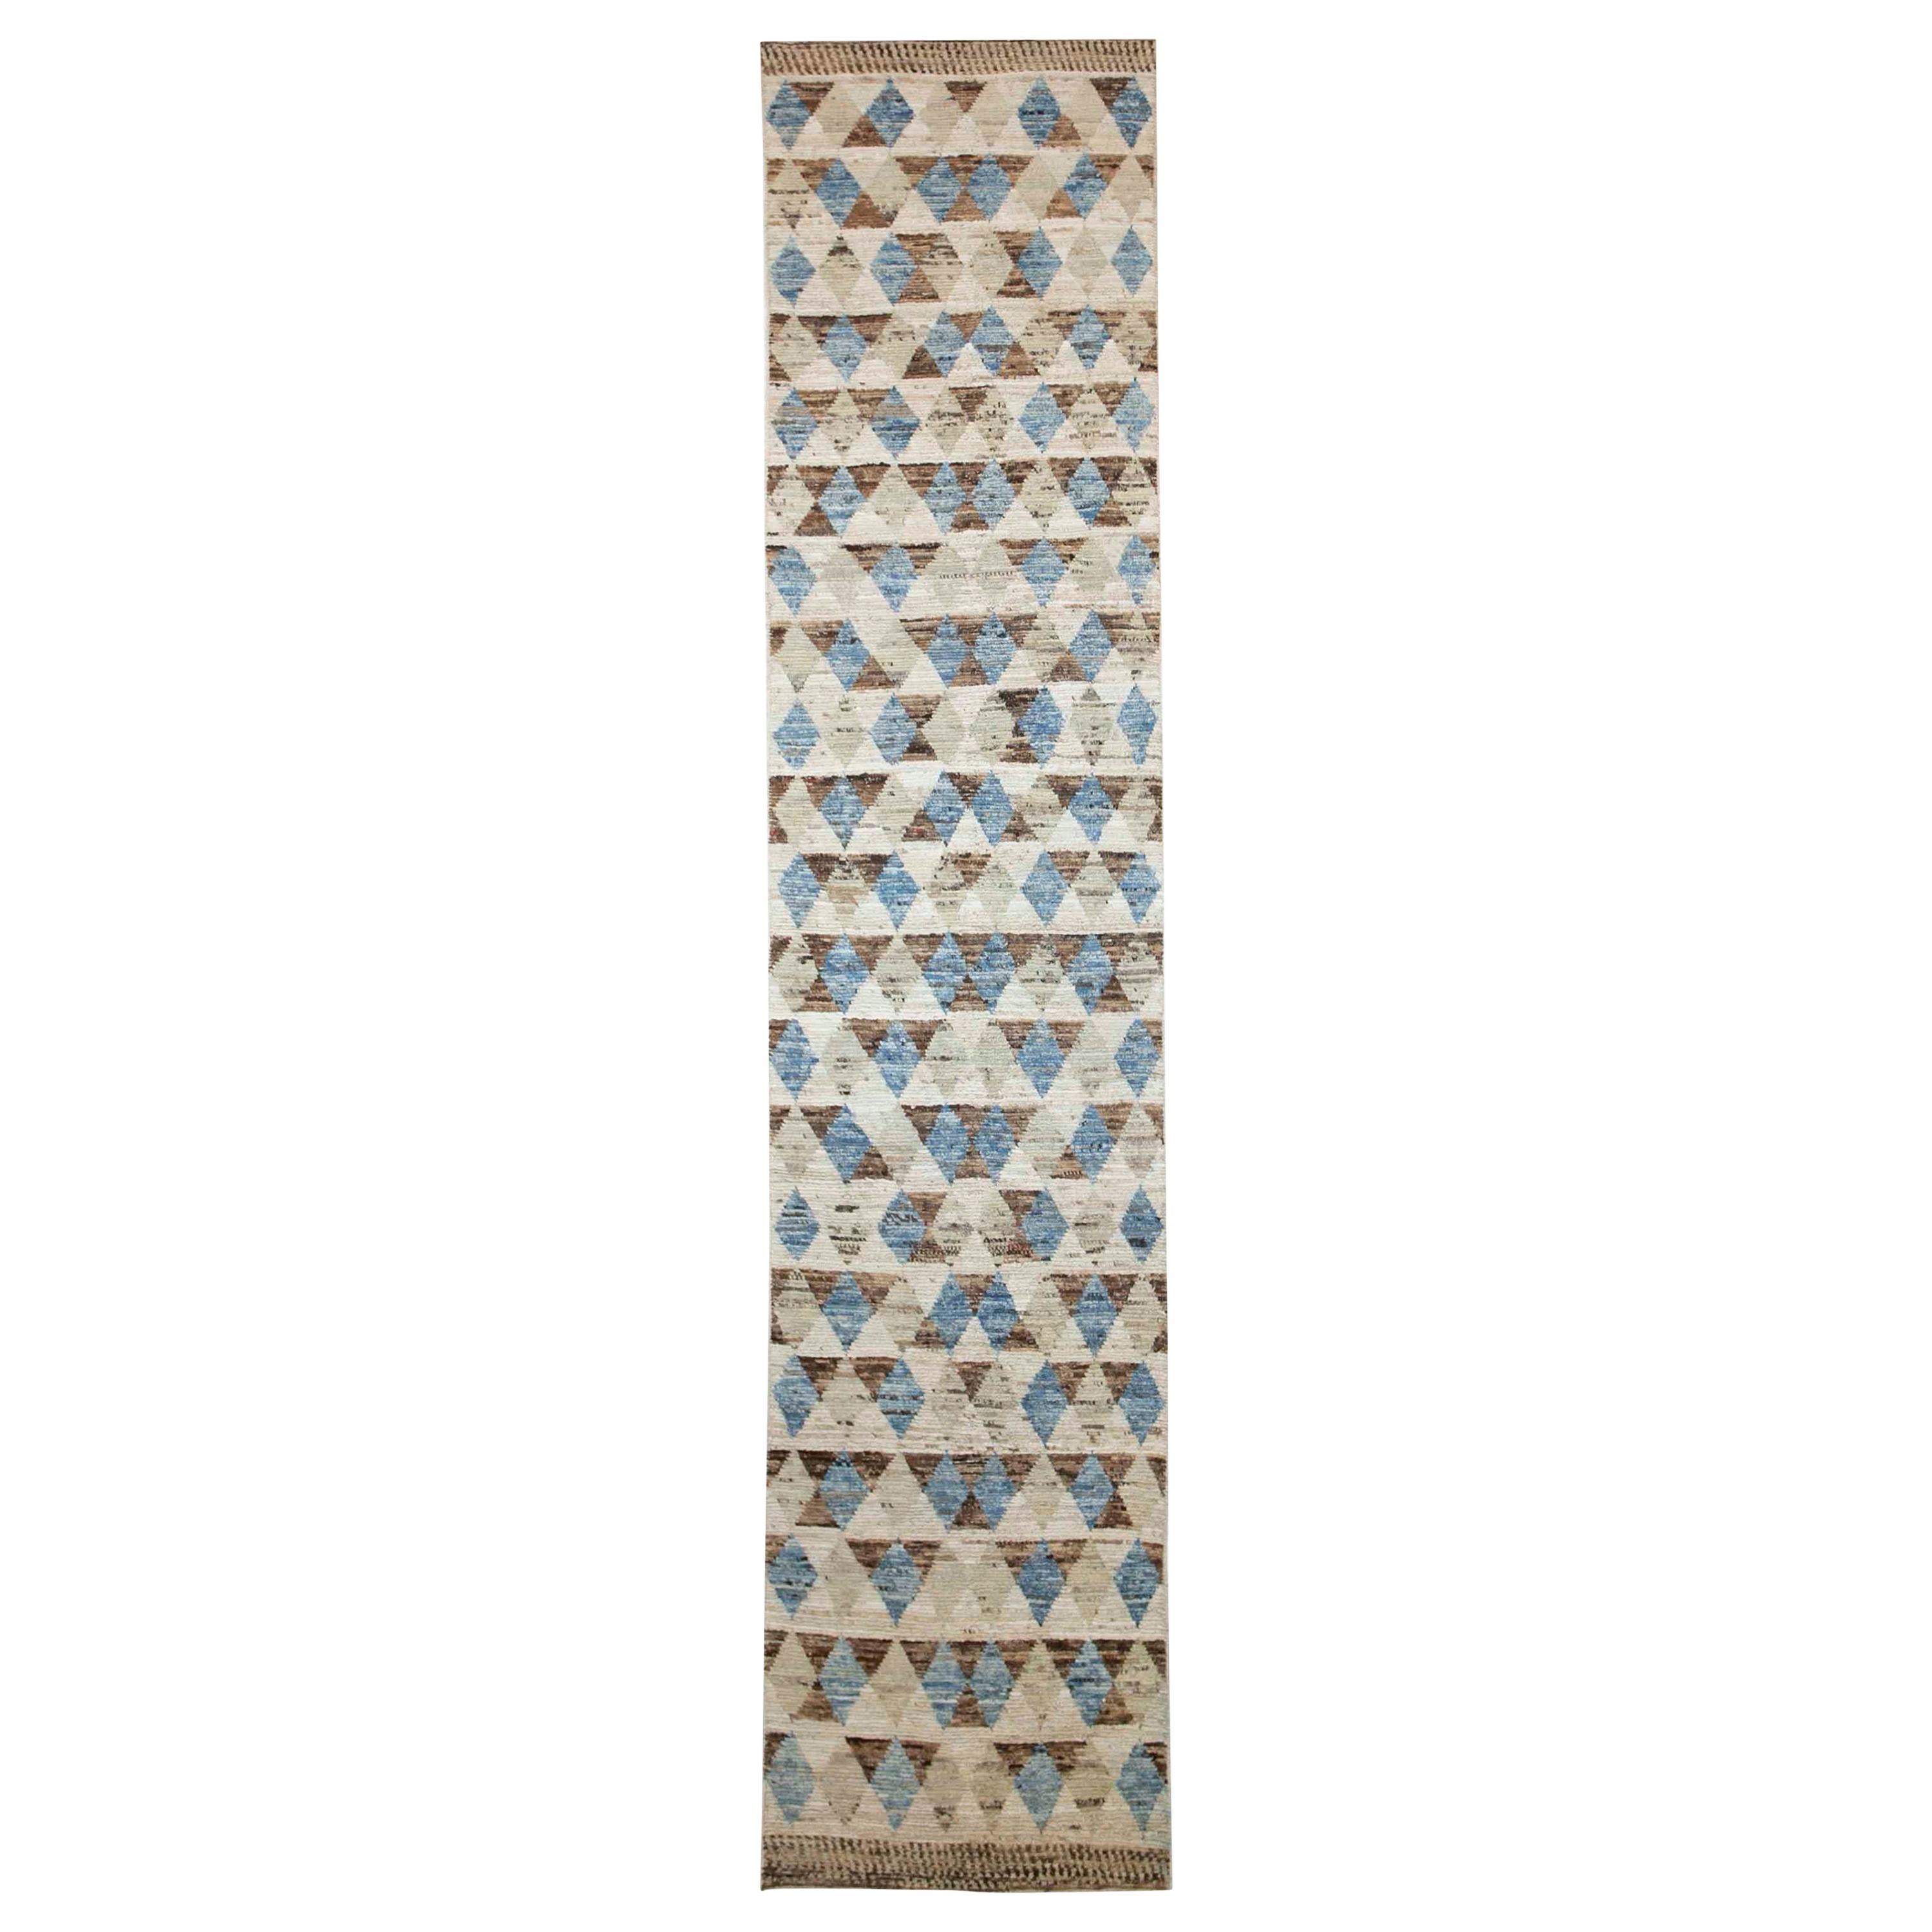 Afghan Moroccan Style Runner Rug with Brown & Blue Triangle Details For Sale